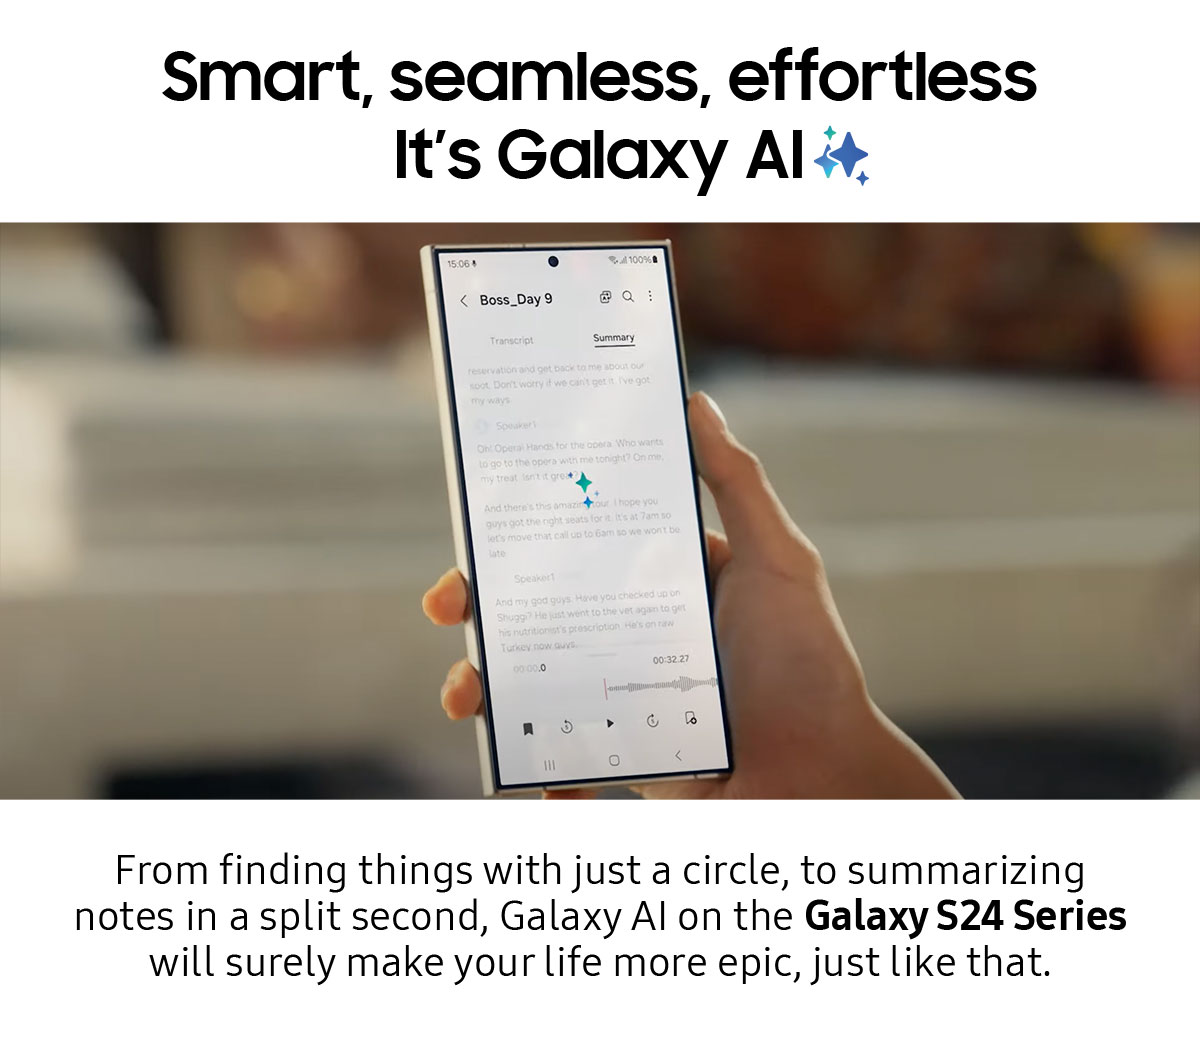 Smart, seamless, effortless. It's Galaxy AI | From finding things with just a circle, to summarizing notes in a split second, Galaxy Al on the Galaxy S24 Series will surely make your life more epic, just like that.